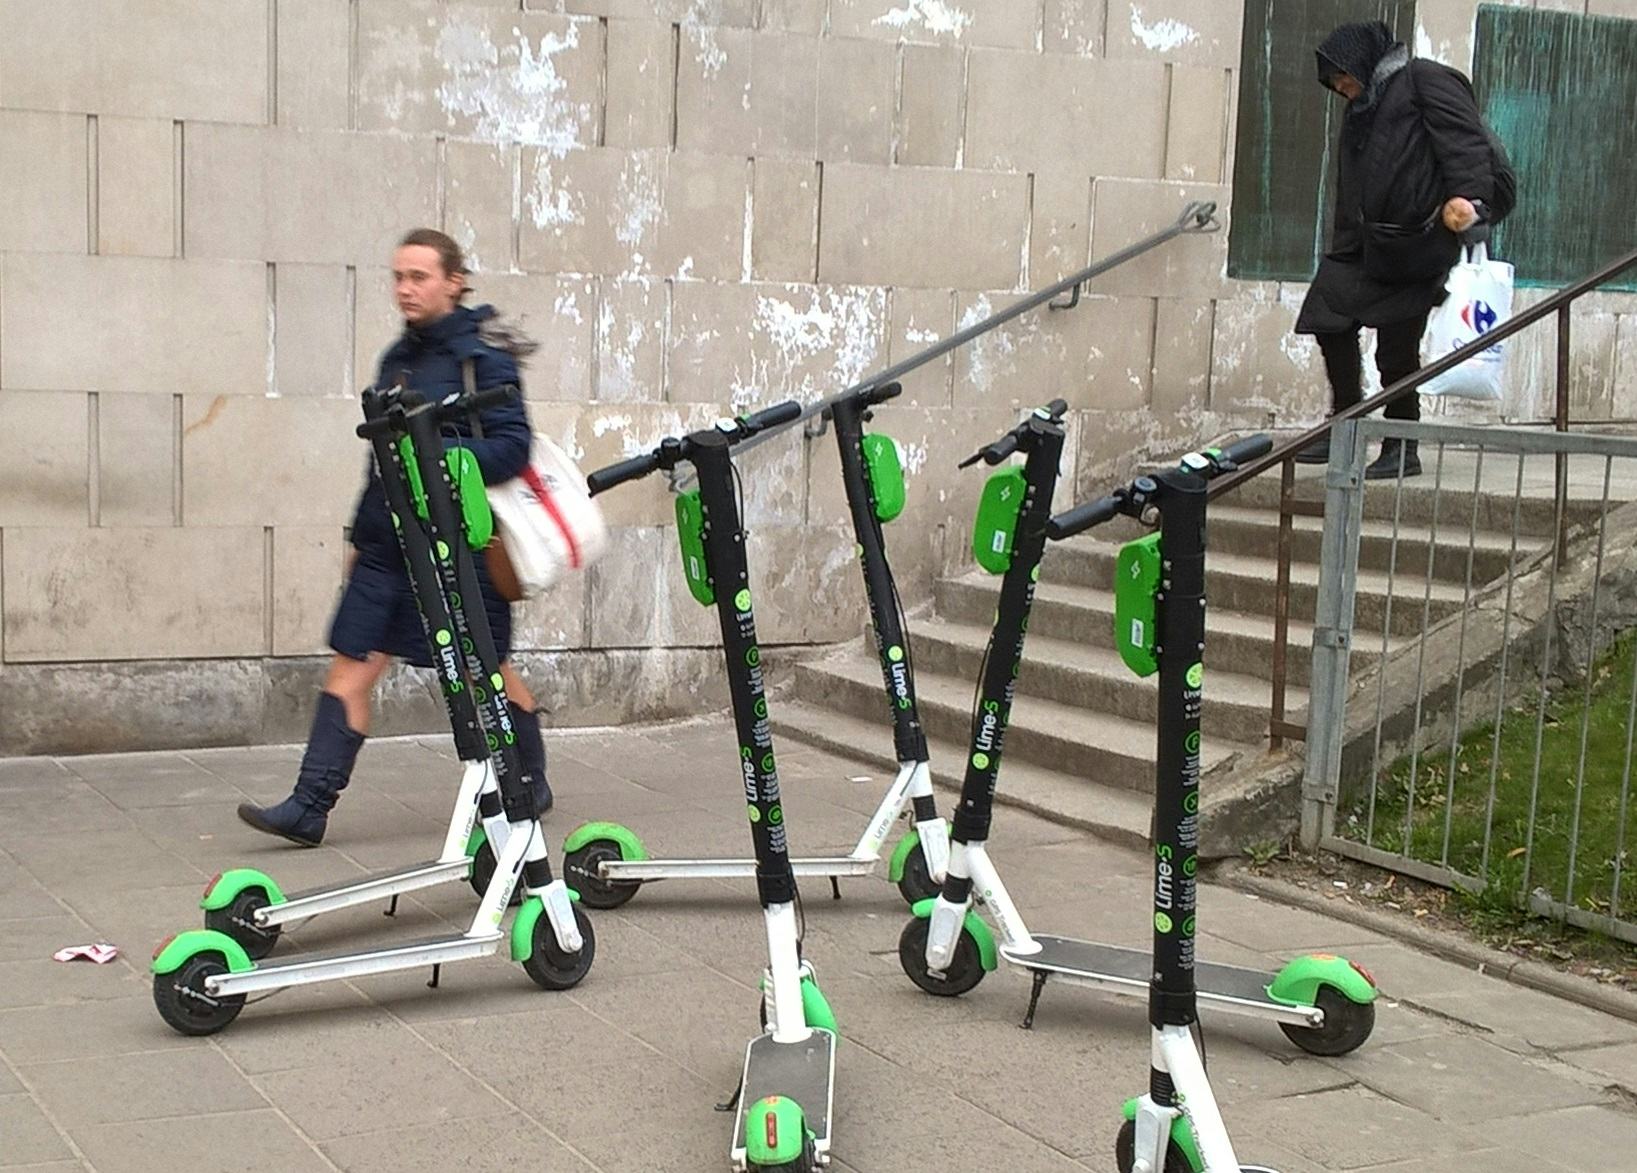 Sharing systems for electric step-scooters are backstabbing the bicycle industry in Poland. – Photo Marek Utkin